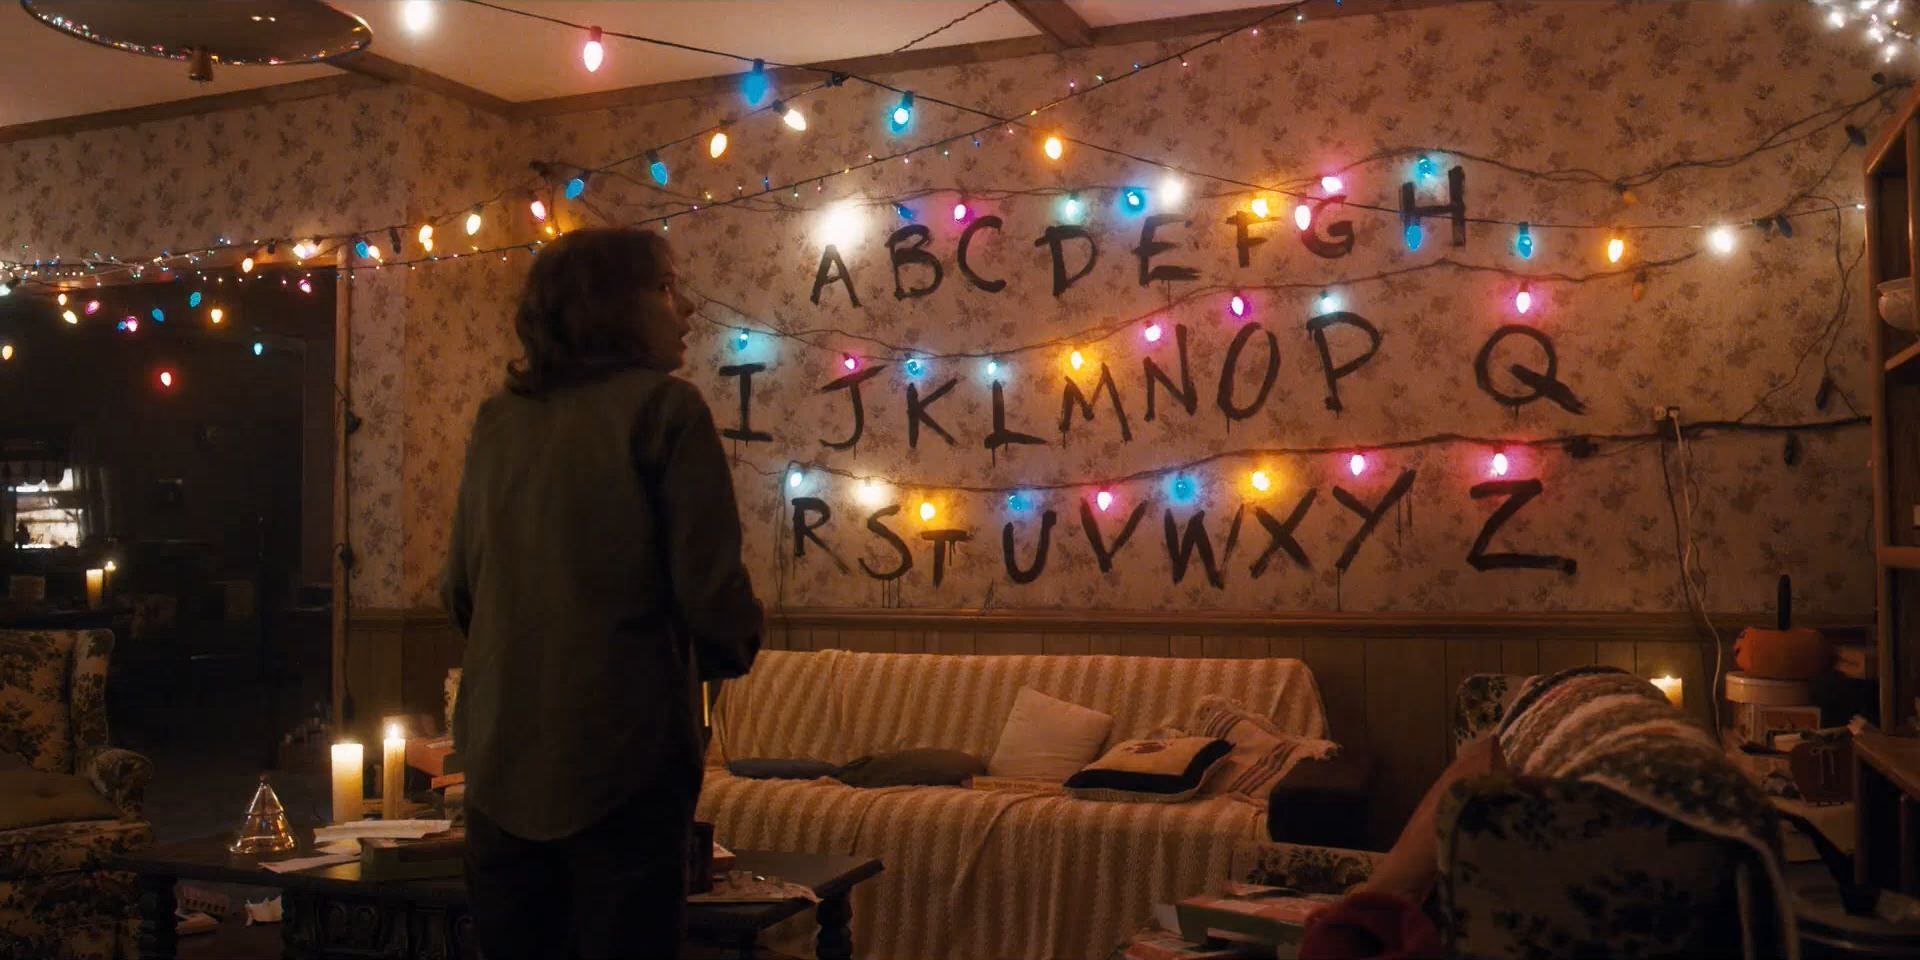 Joyce stares at lights on the wall in Stranger Things